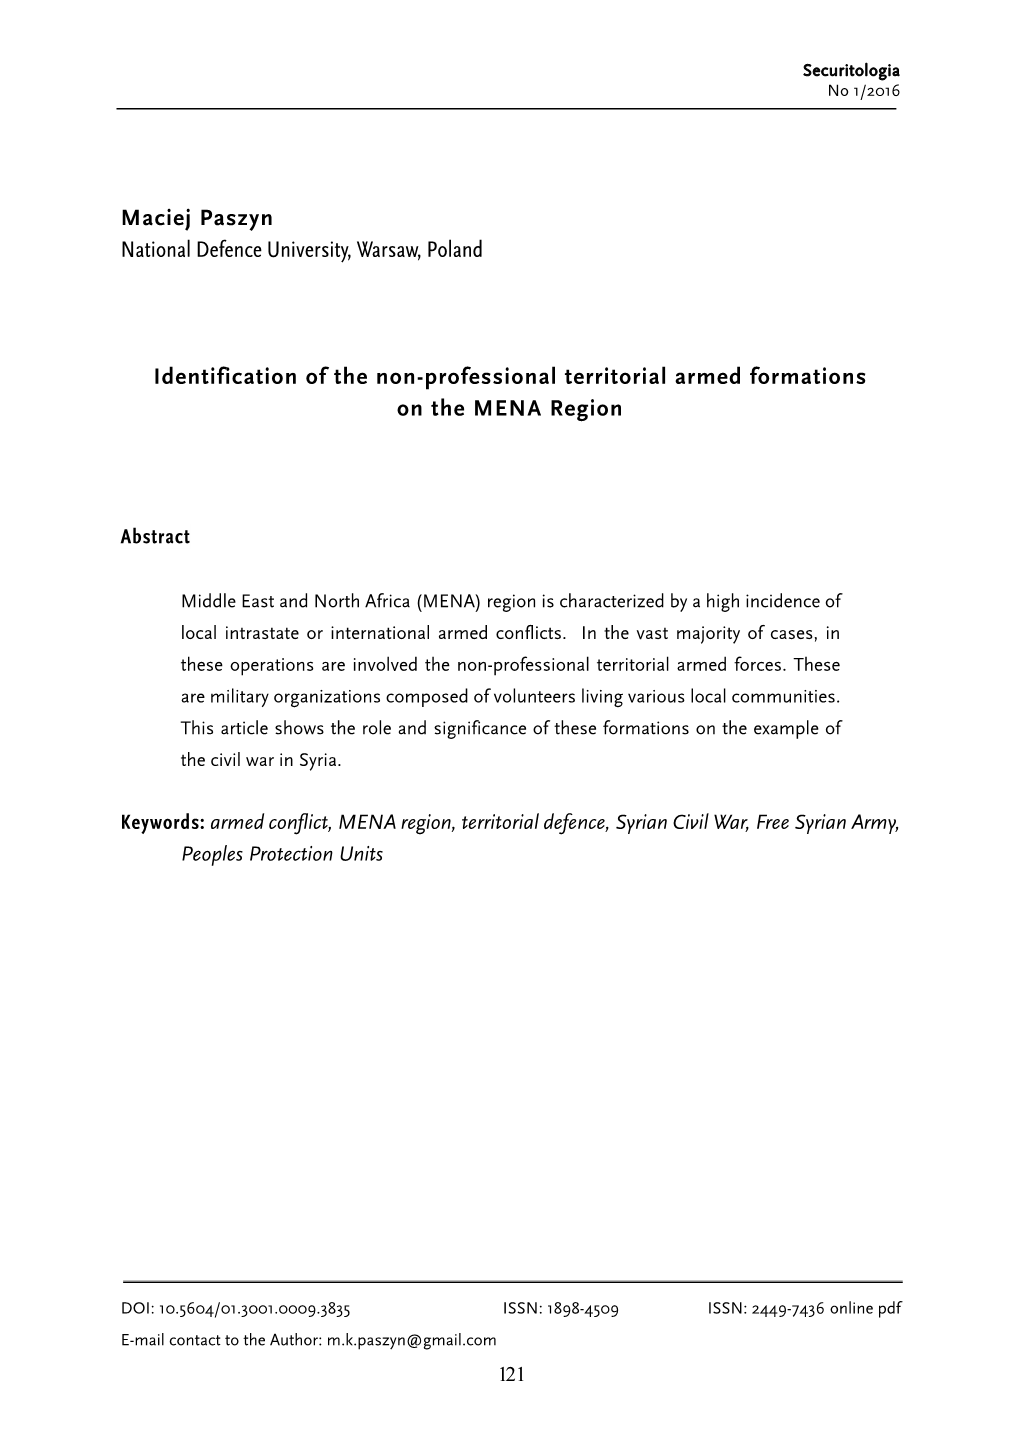 Identification of the Non-Professional Territorial Armed Formations on the MENA Region